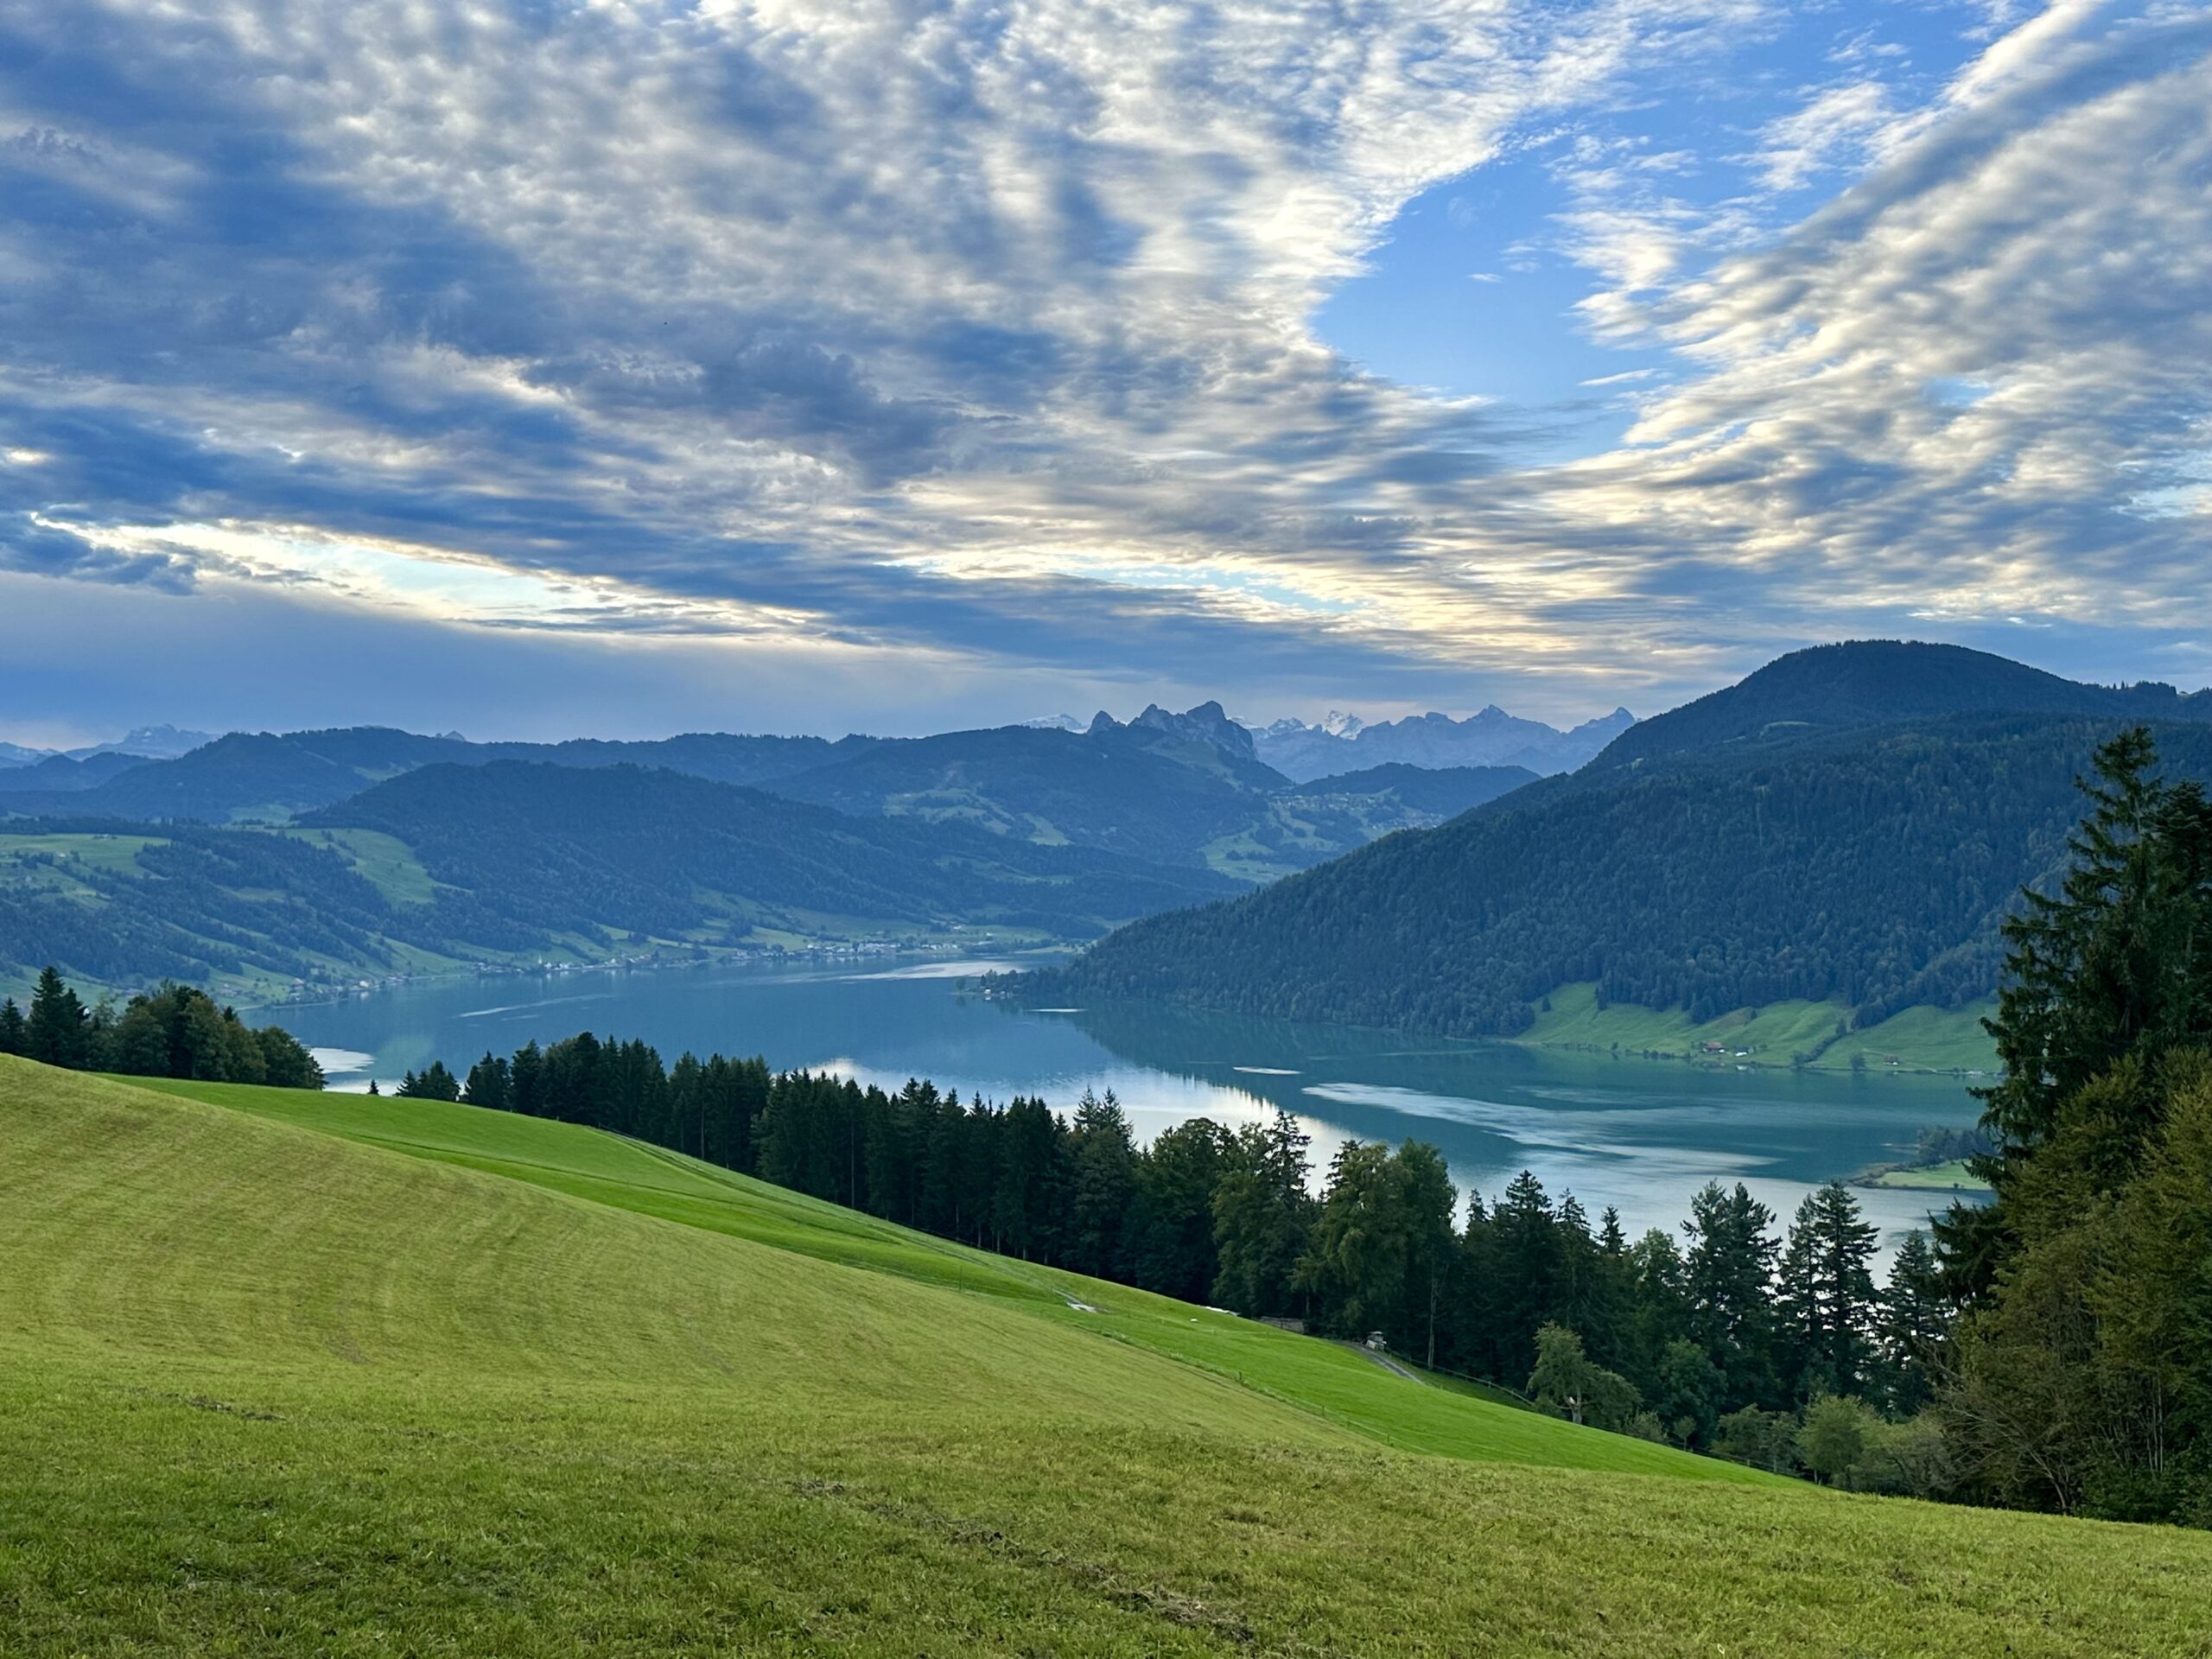 View of a lake under a cloudy but still blue sky with green pastures in the foreground and dark green forested hills in the background.